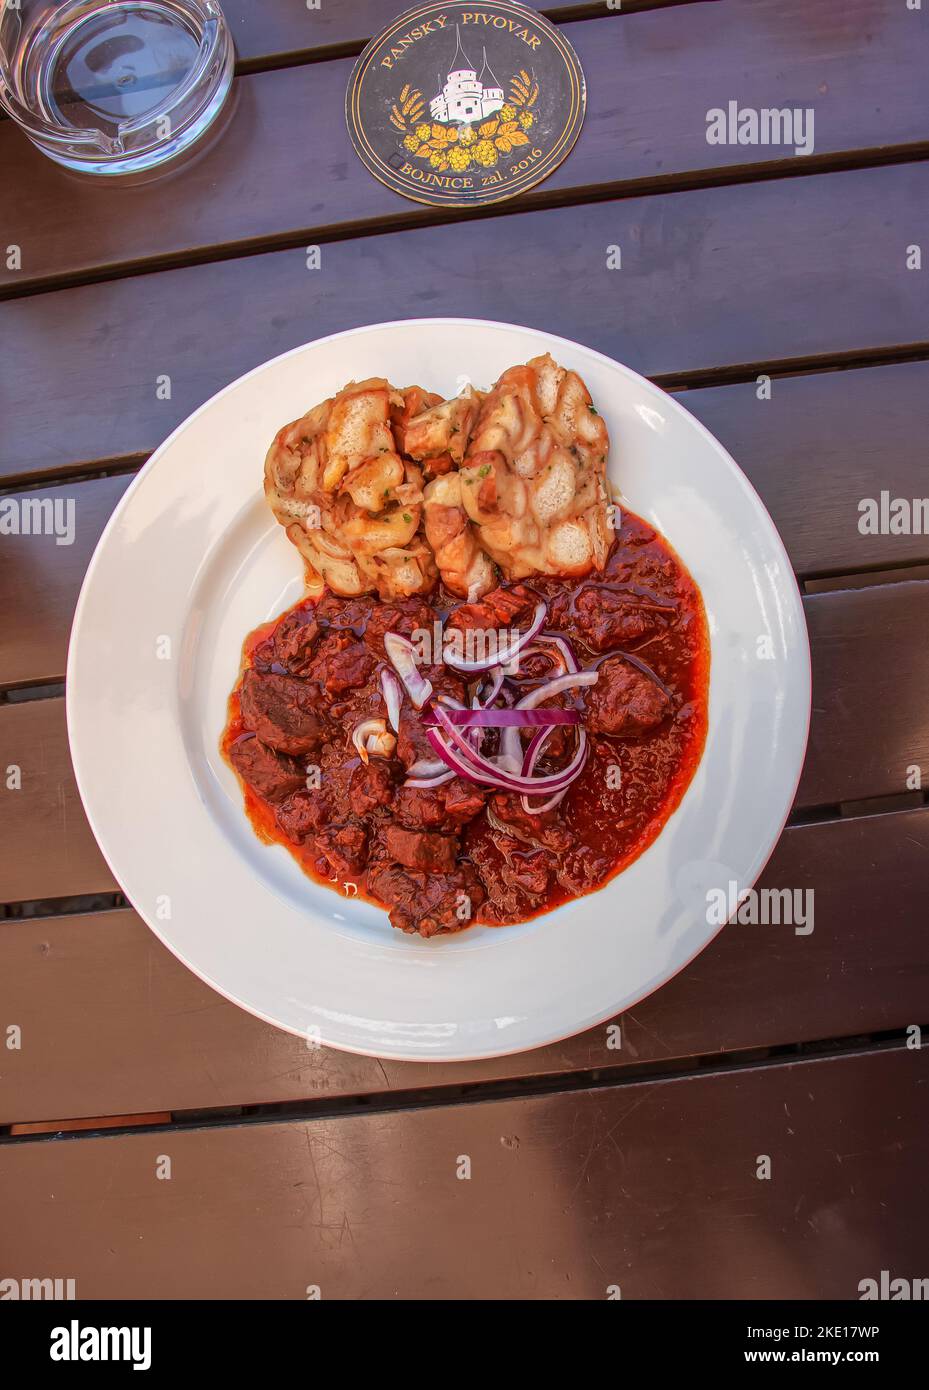 Bojnice, Slovakia - 06.11.2022: Beef goulash with czech dumplings on a white plate on a wooden table in a bar. Stock Photo